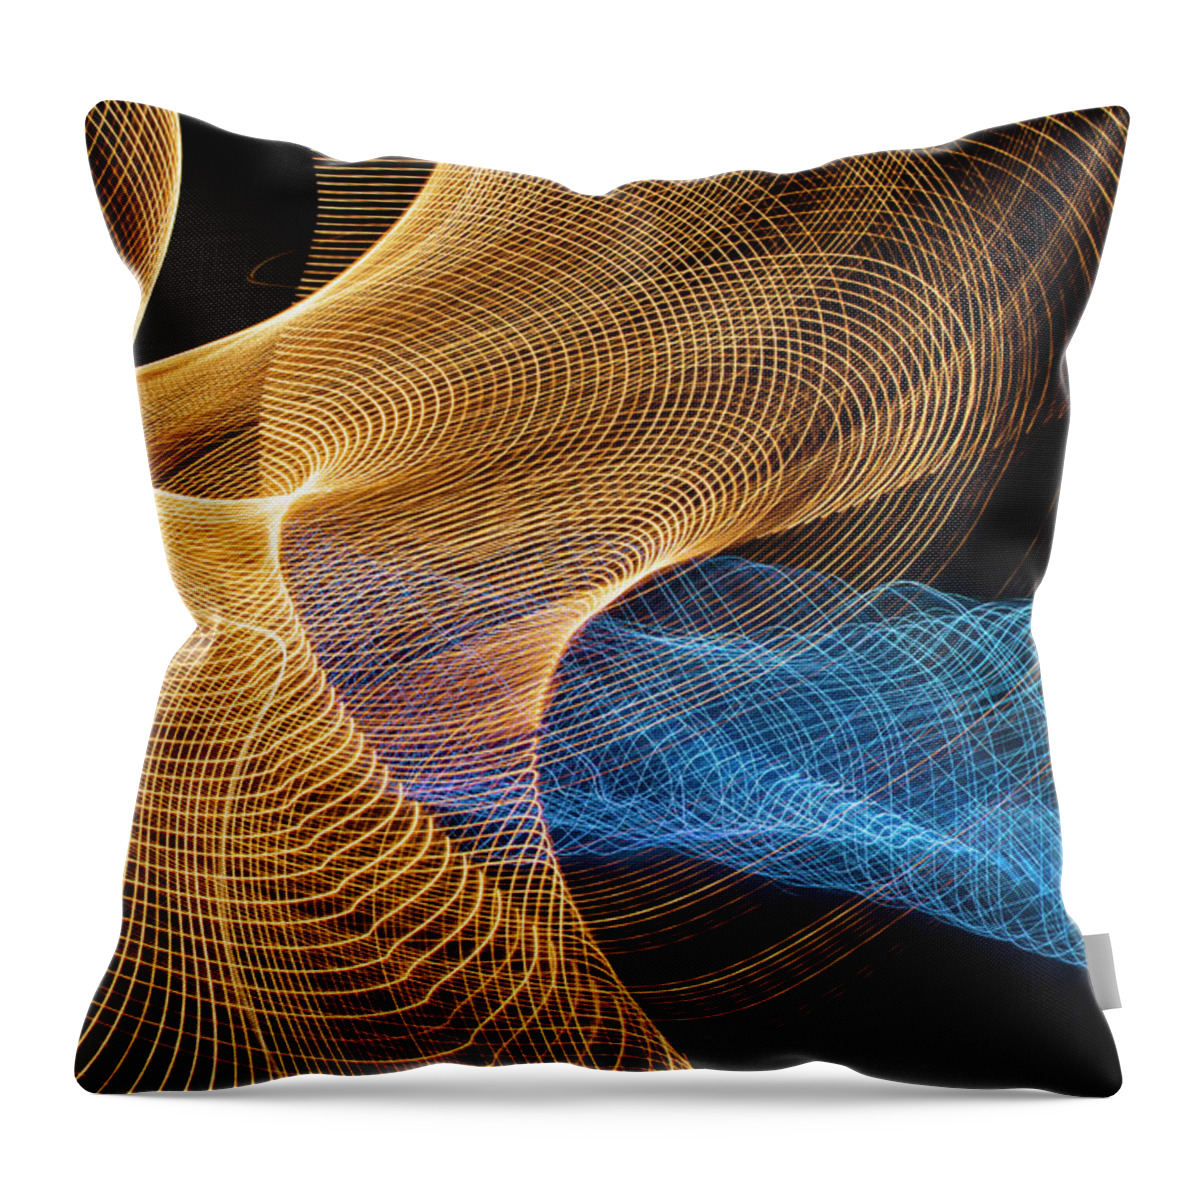 Internet Throw Pillow featuring the photograph Close Up Of Flowing Light Trails by John M Lund Photography Inc